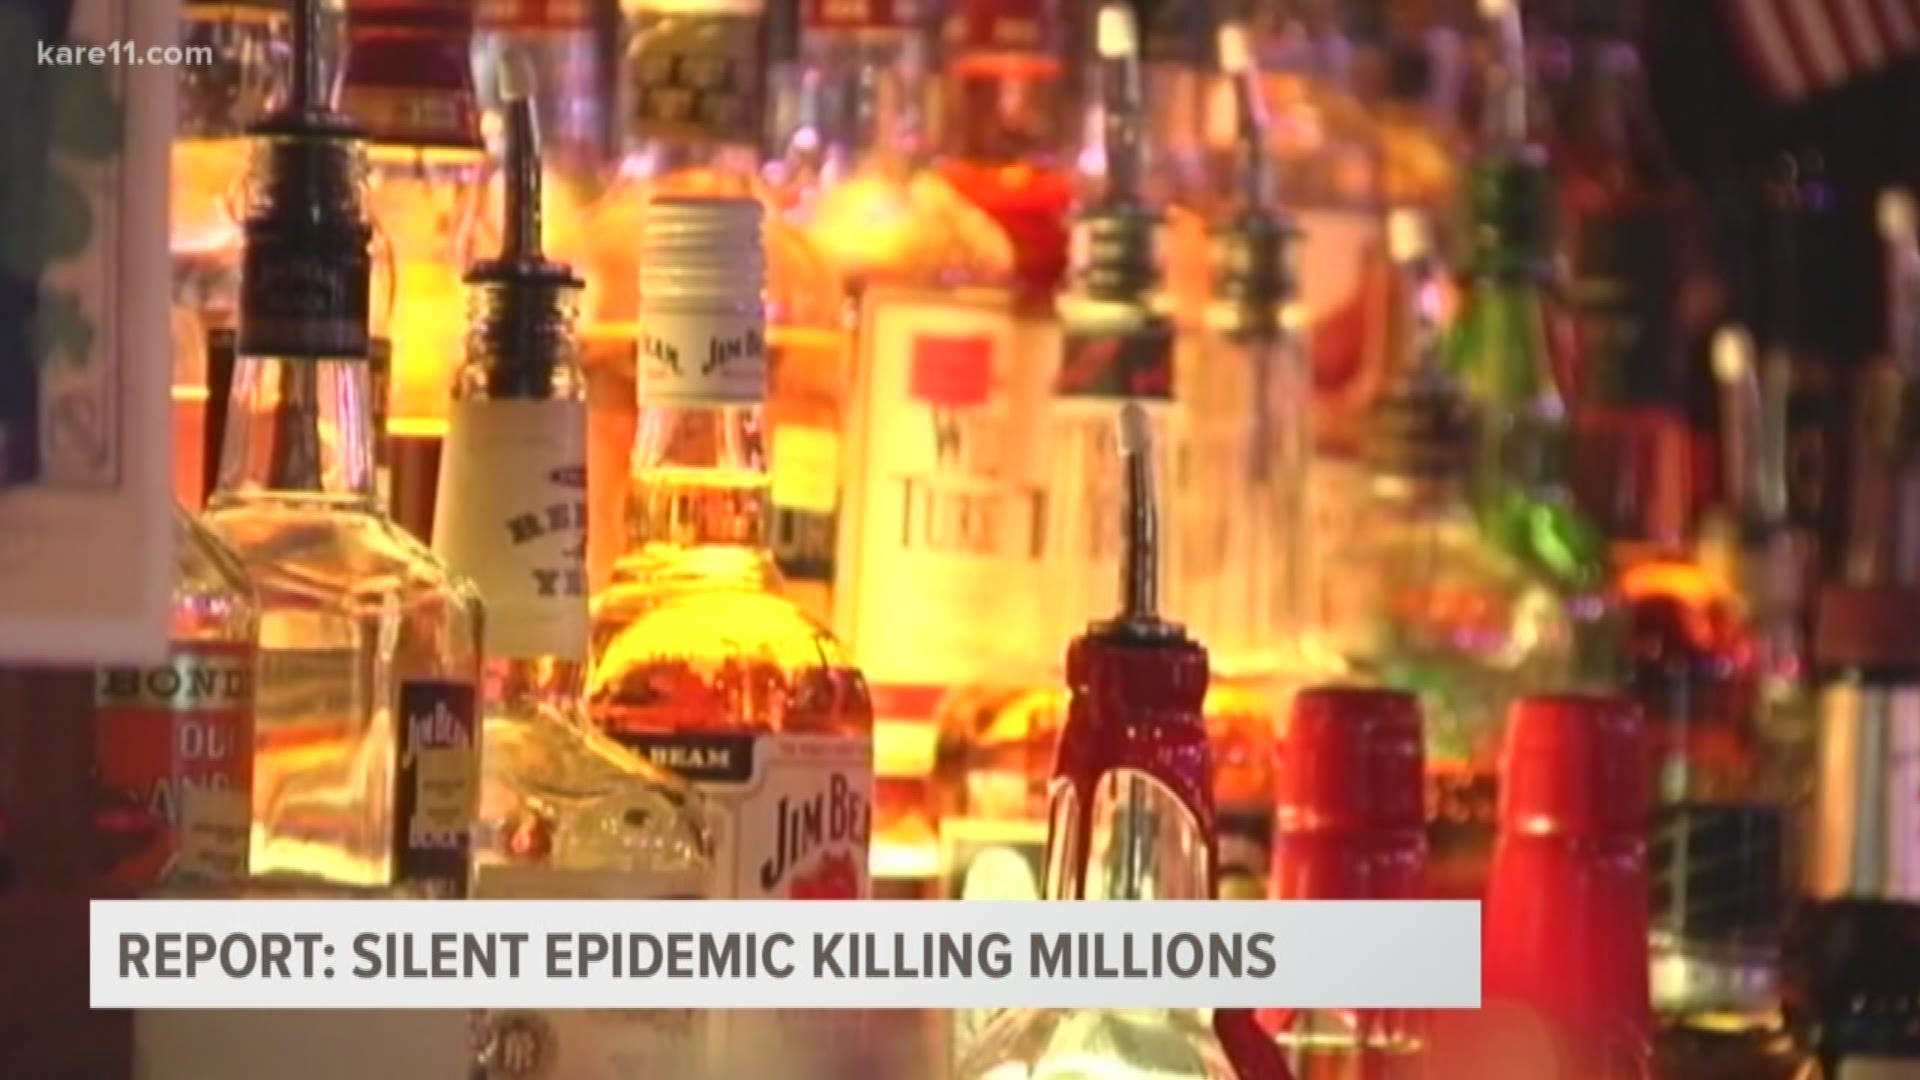 Excessive alcohol use is a silent epidemic killing 1 in 20 people globally.